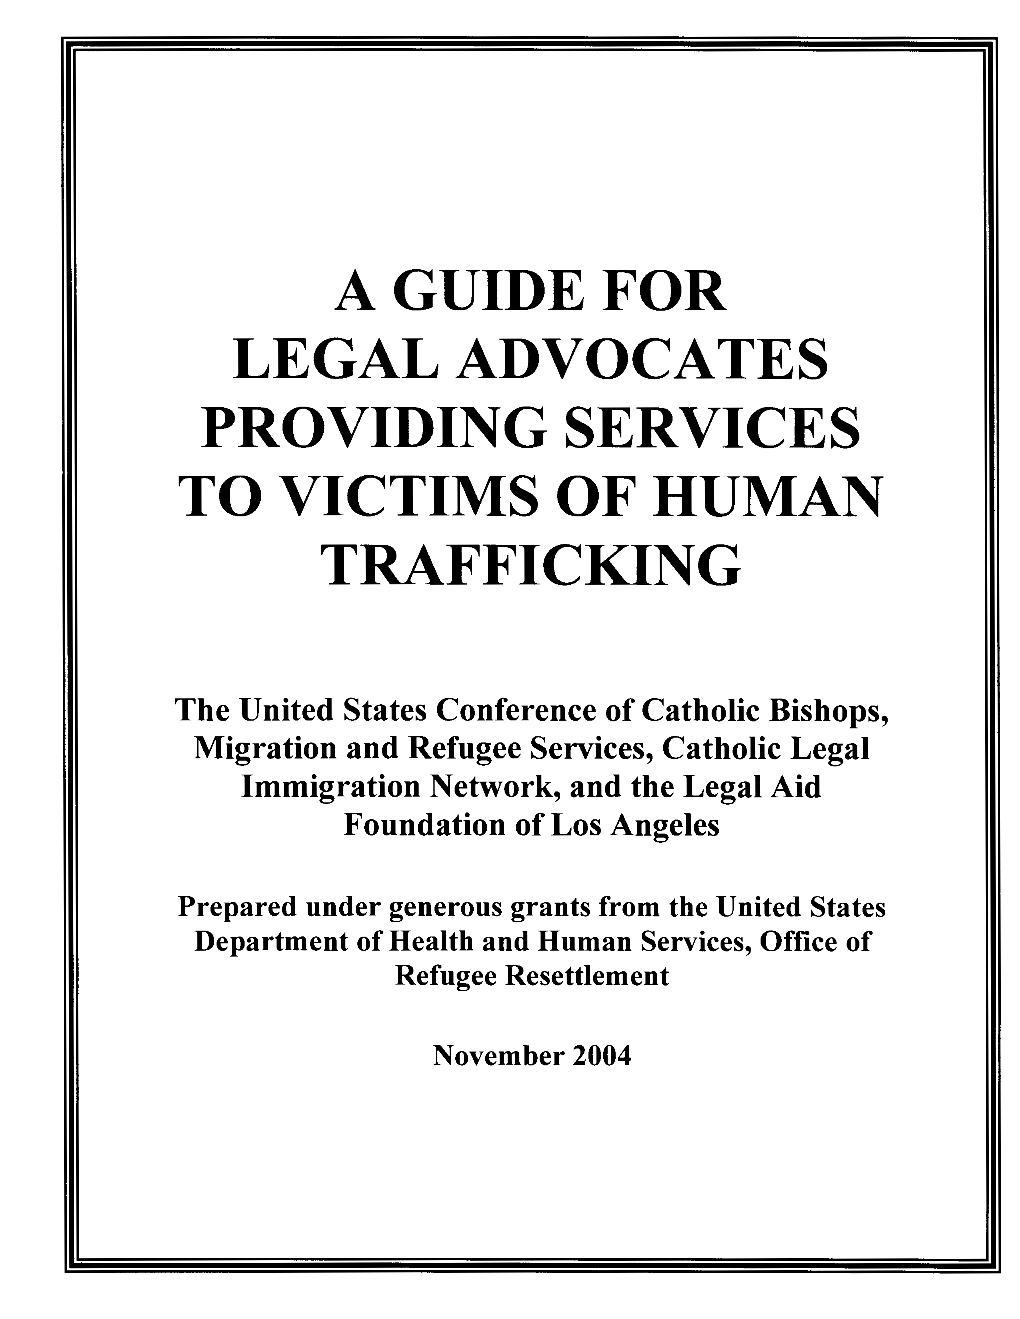 Guide for Legal Advocates Providing Services to Victims of Human Trafficking Jan